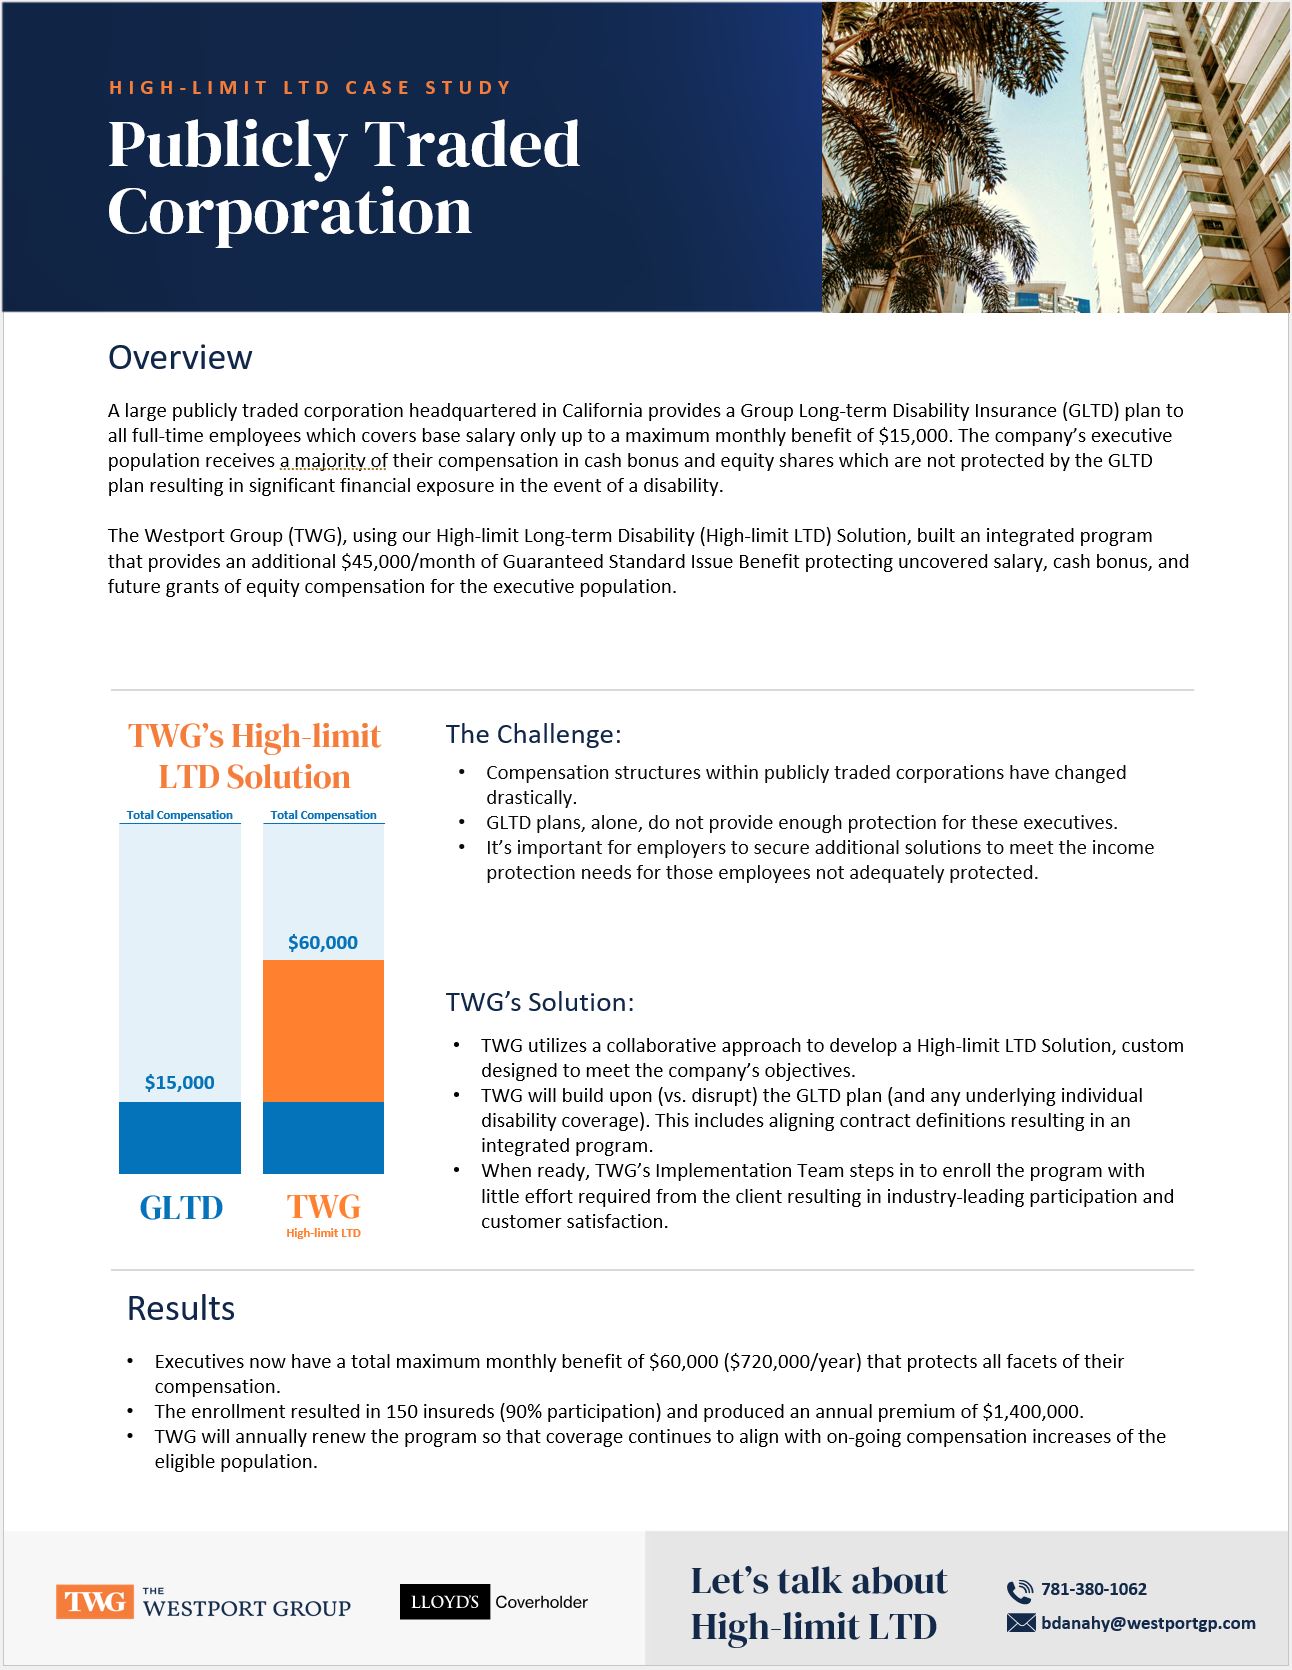 High-Limit LTD Case Study: Publicly Traded Corporation